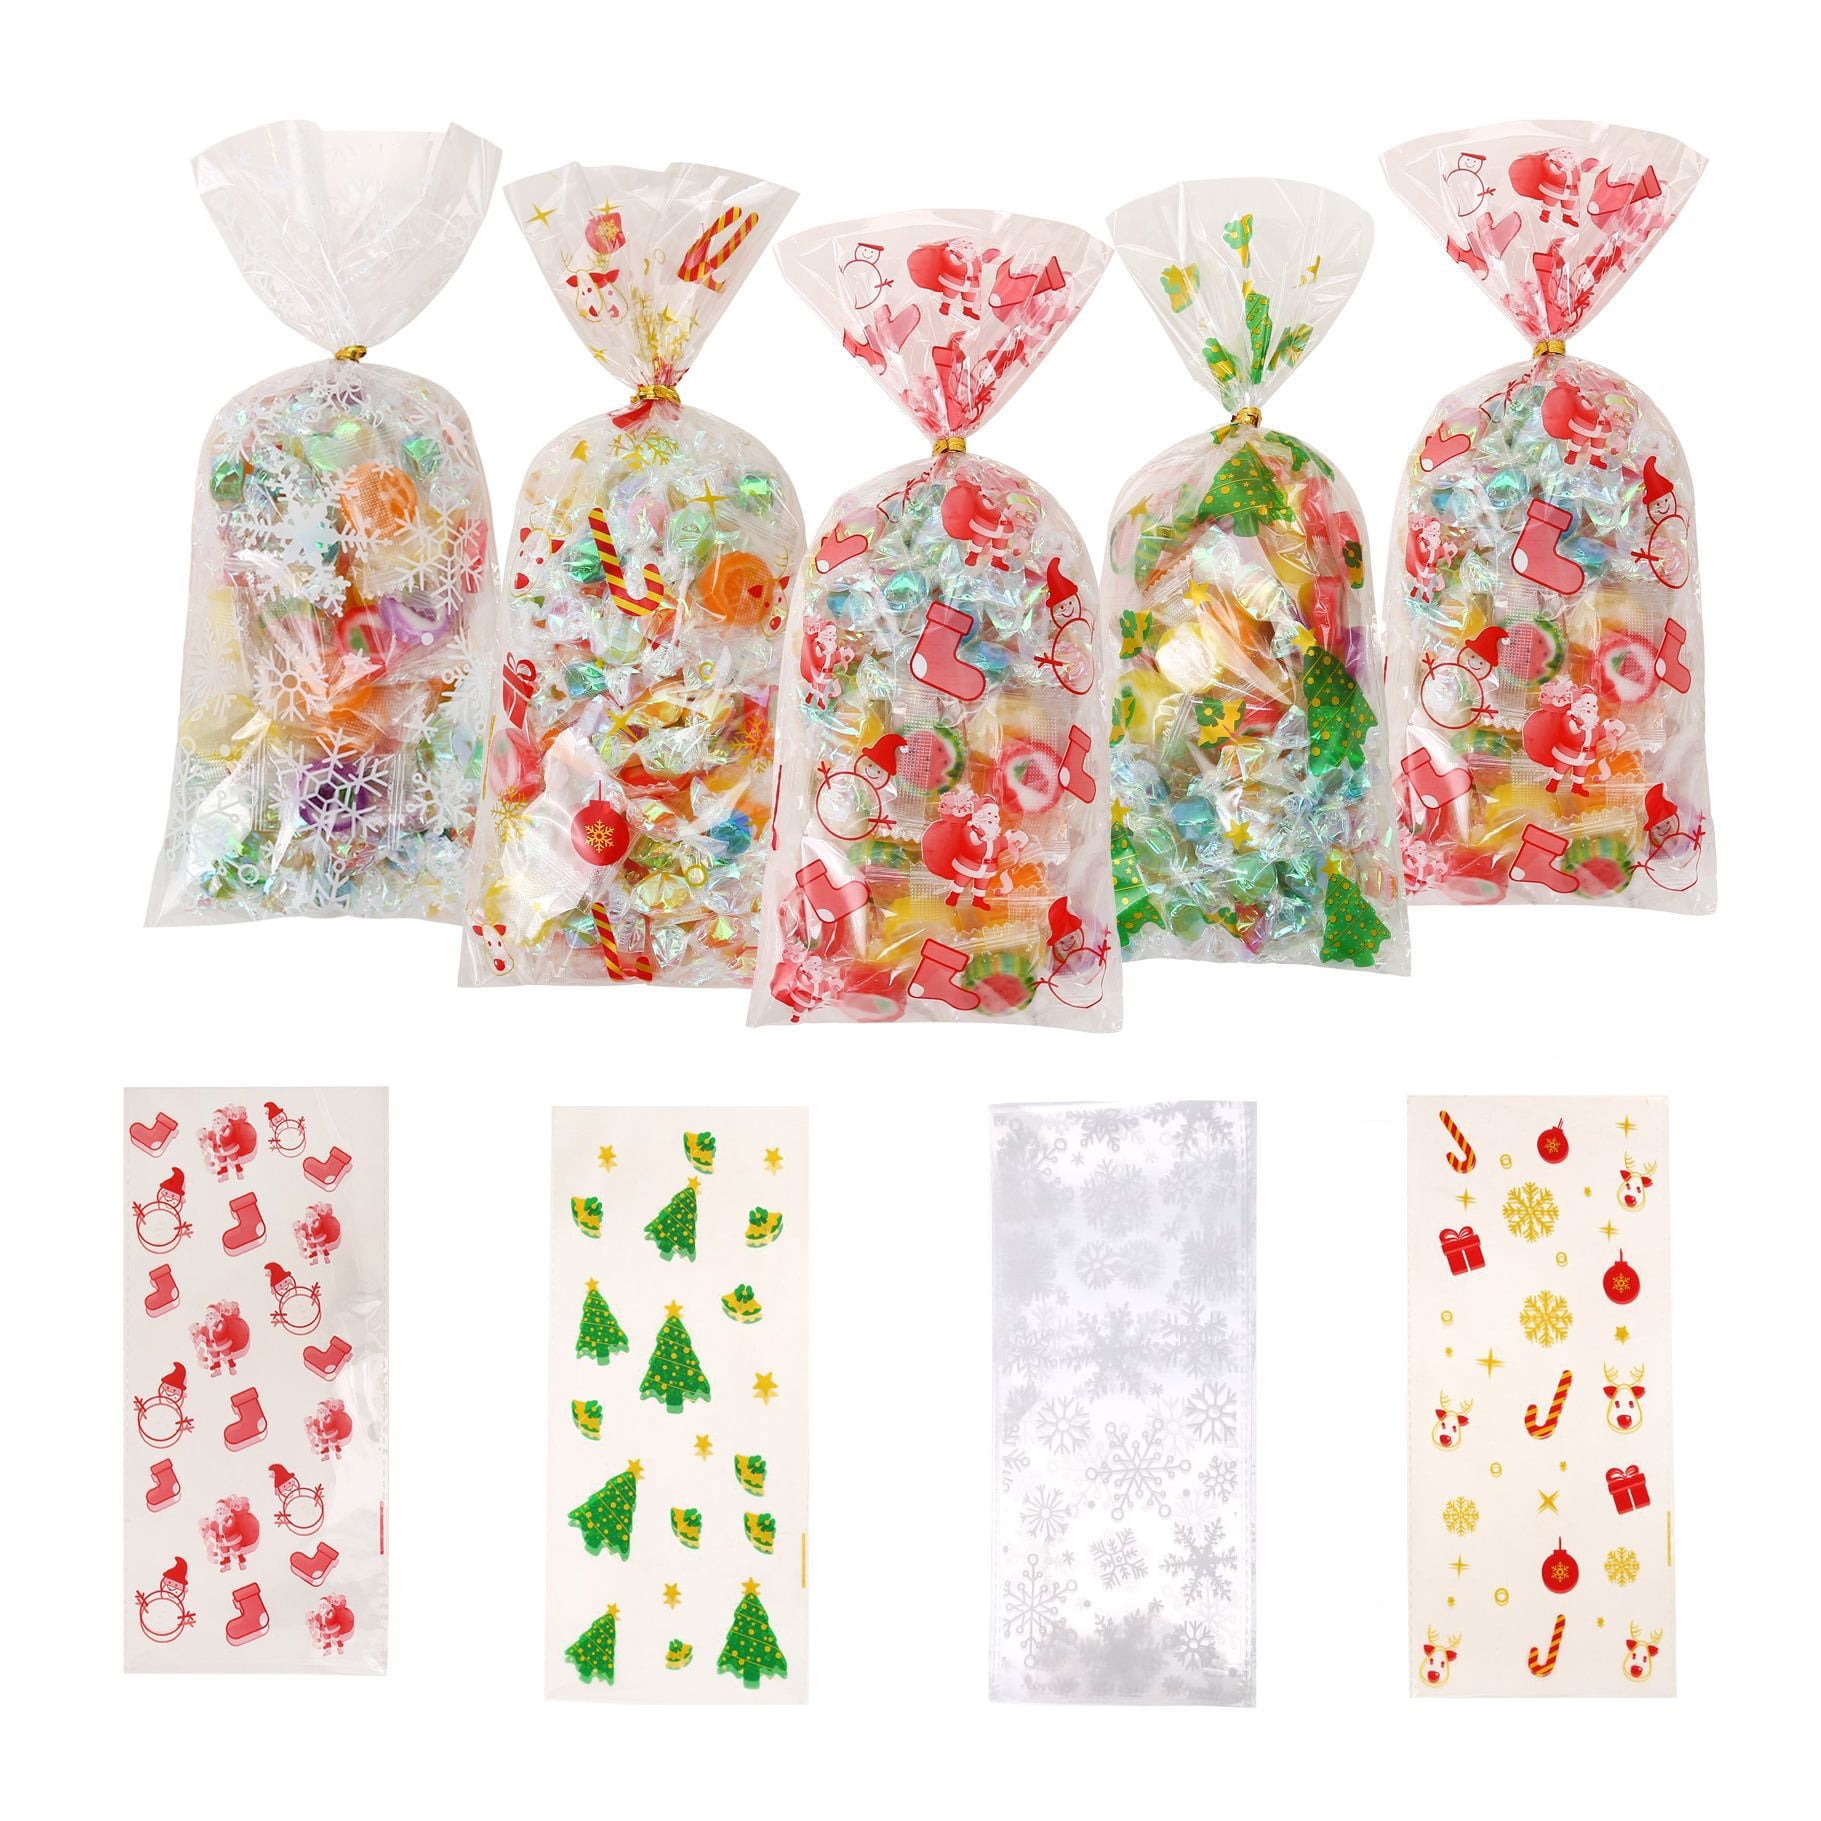 15 CHRISTMAS TREAT BAGS With Gift Ties Xmas Cellophane Loot Children/Kid Sweets 